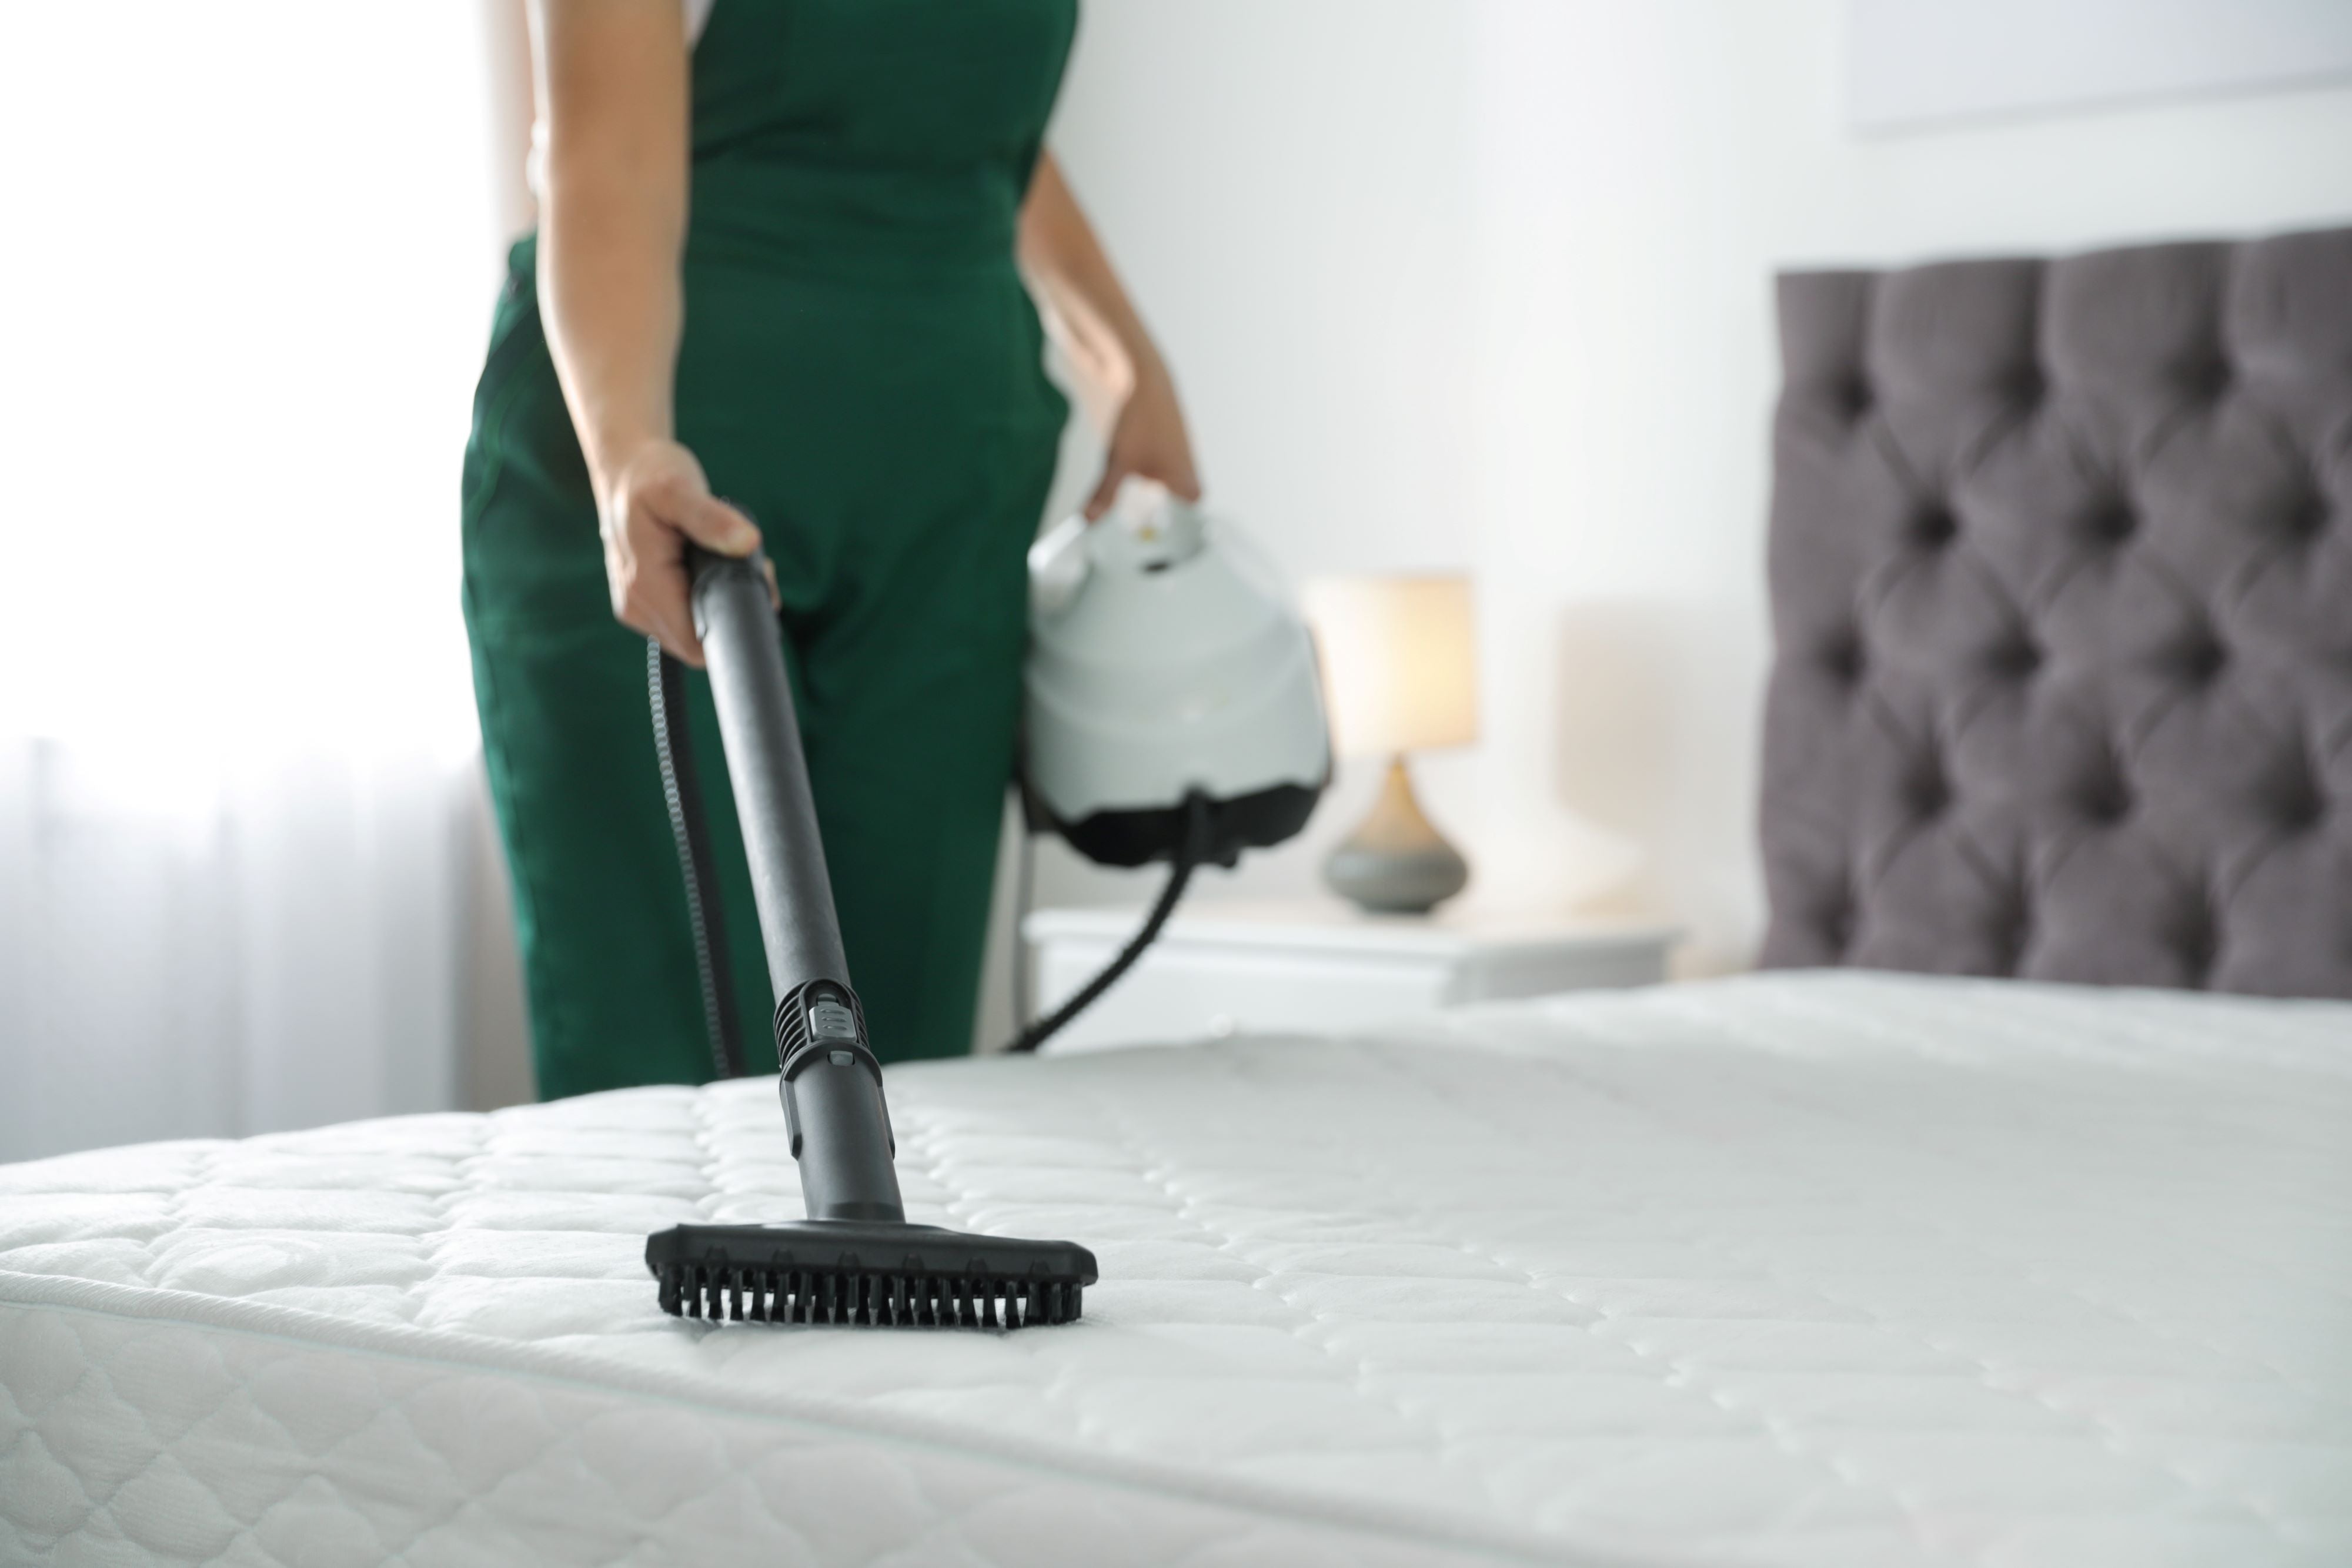 removing dust on mattress with vacuum cleaner